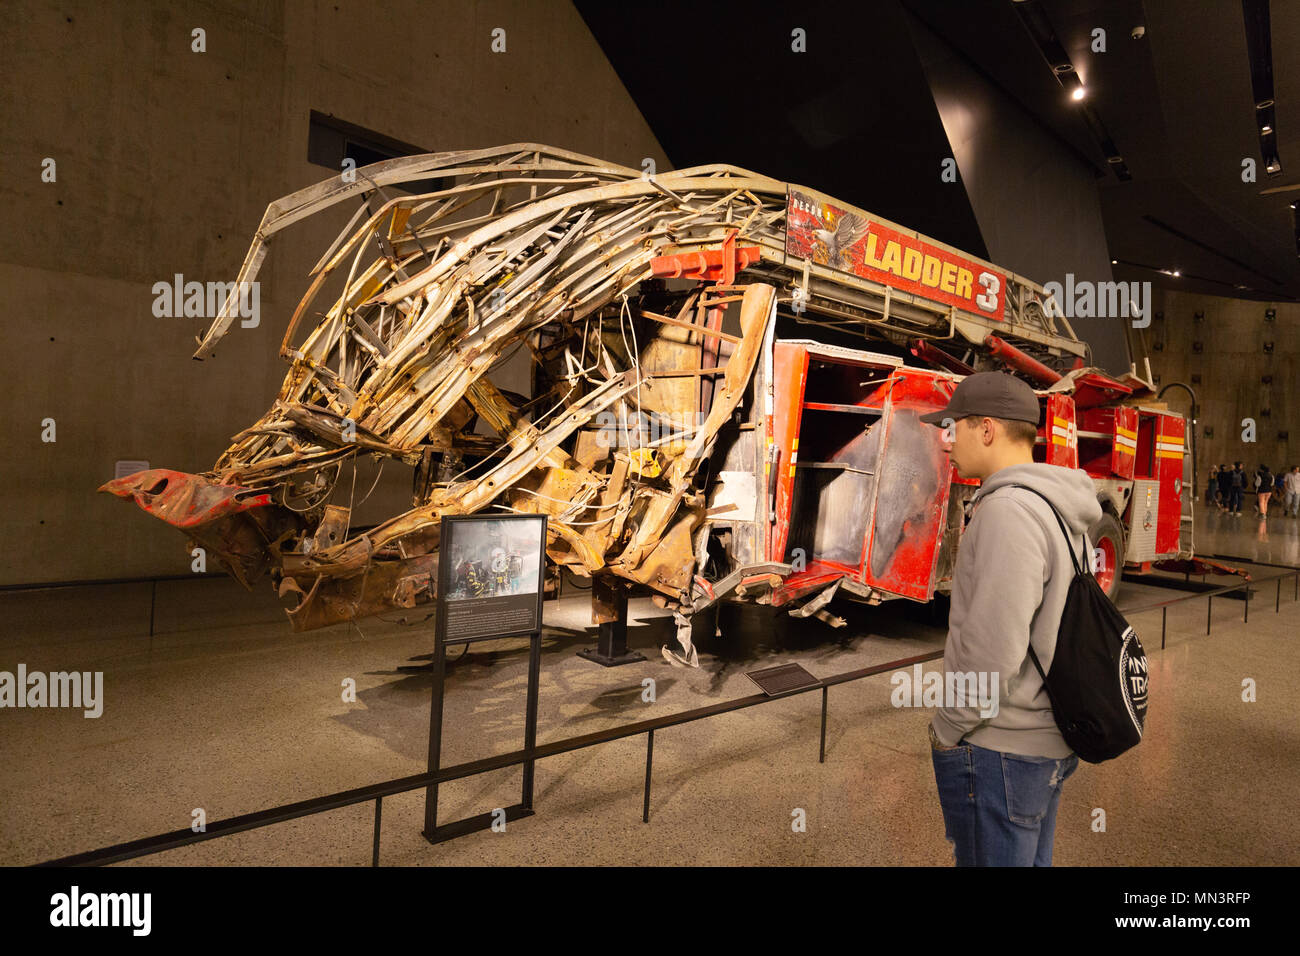 Fire Department of New York (FDNY)bLadder Company 3 firetruck, wreck in the 9/11 Memorial Museum, New York city, USA Stock Photo